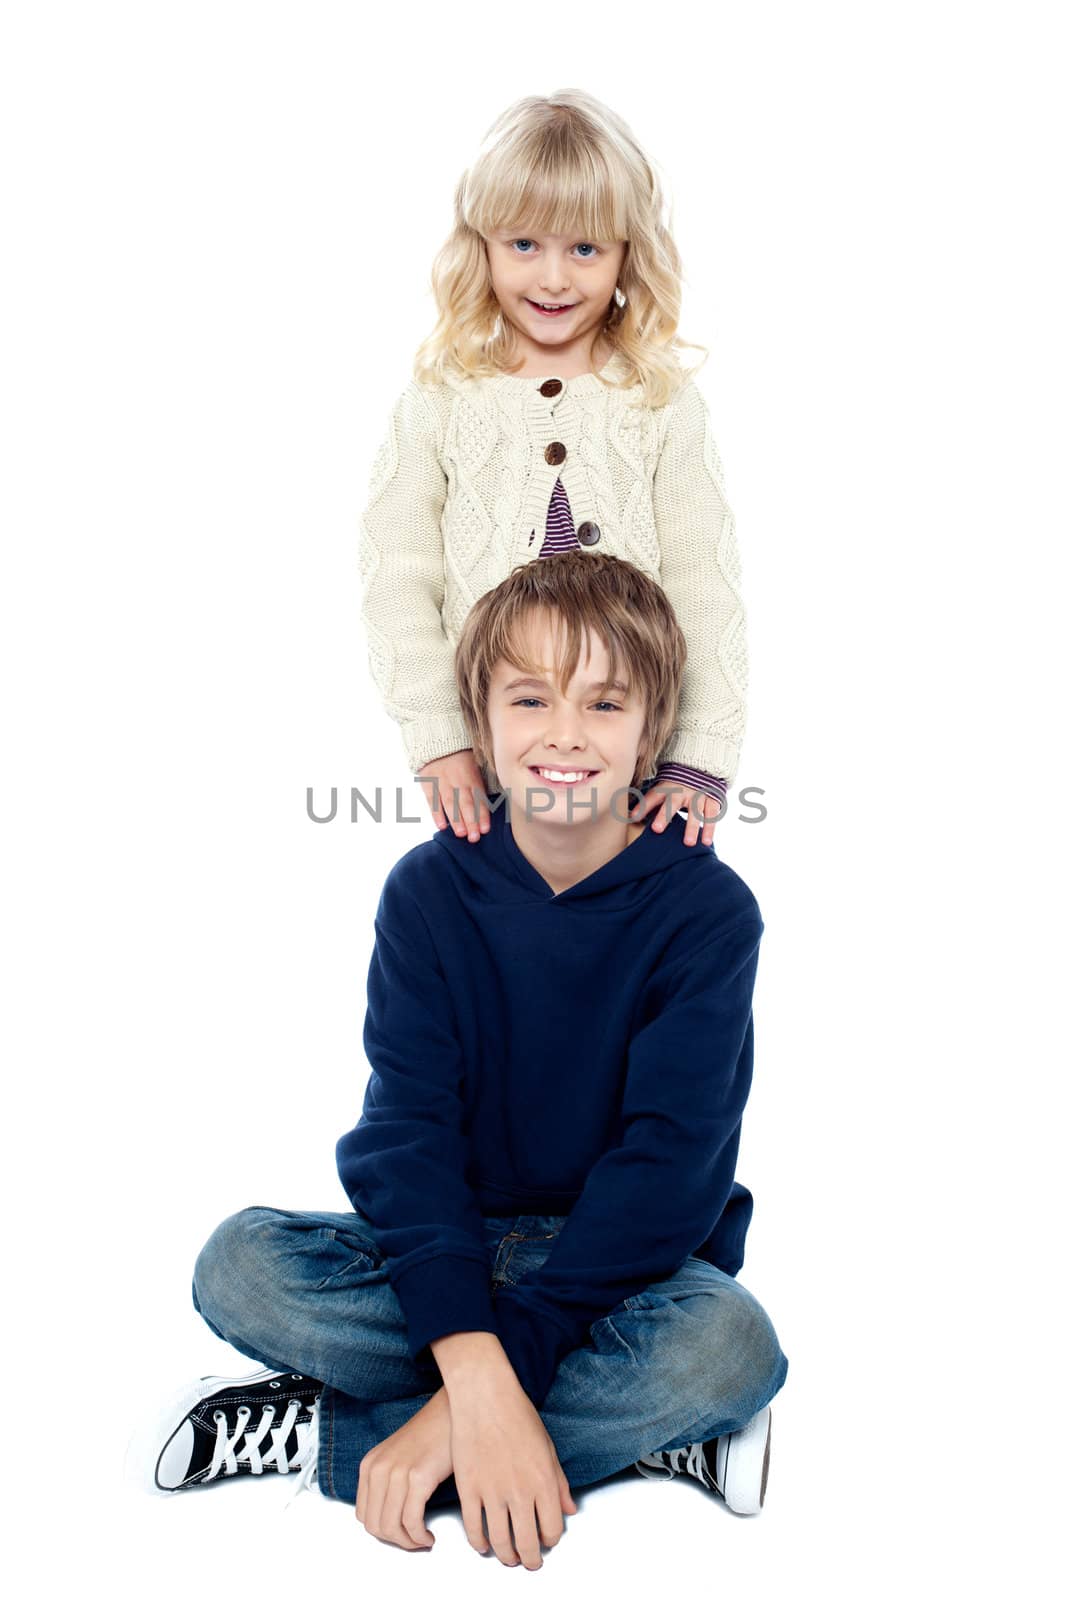 Smart young boy sitting with his legs crossed and his sister standing behind him.